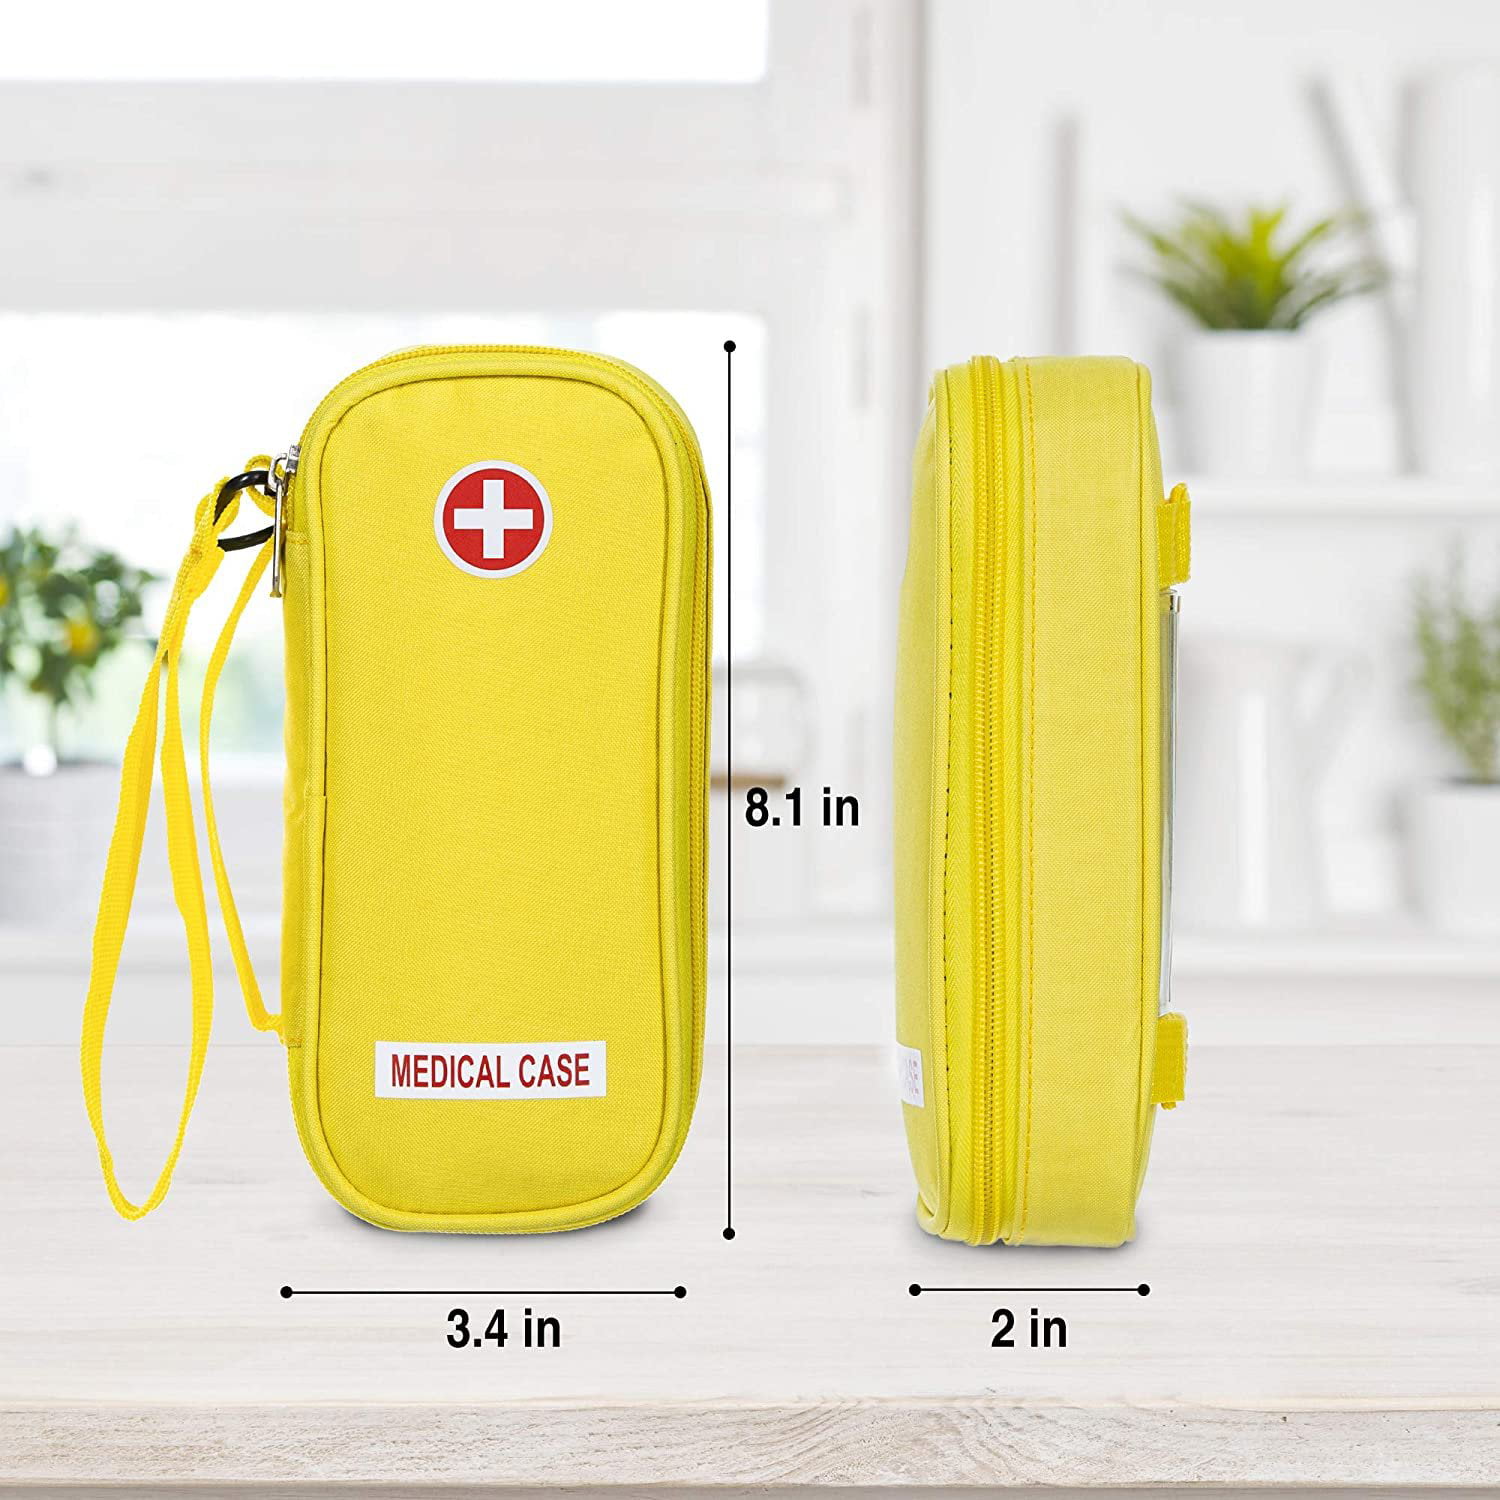 Amazon.com: PracMedic Bags Epipen Carrying Case- holds Epi Pens, Auvi Q,  Epinephrine, Inhaler, Medicine Syringe, Diabetic Supplies, Portable and  Insulated, Travel Medicine Bag for Emergencies, updated (Teal) : Health &  Household